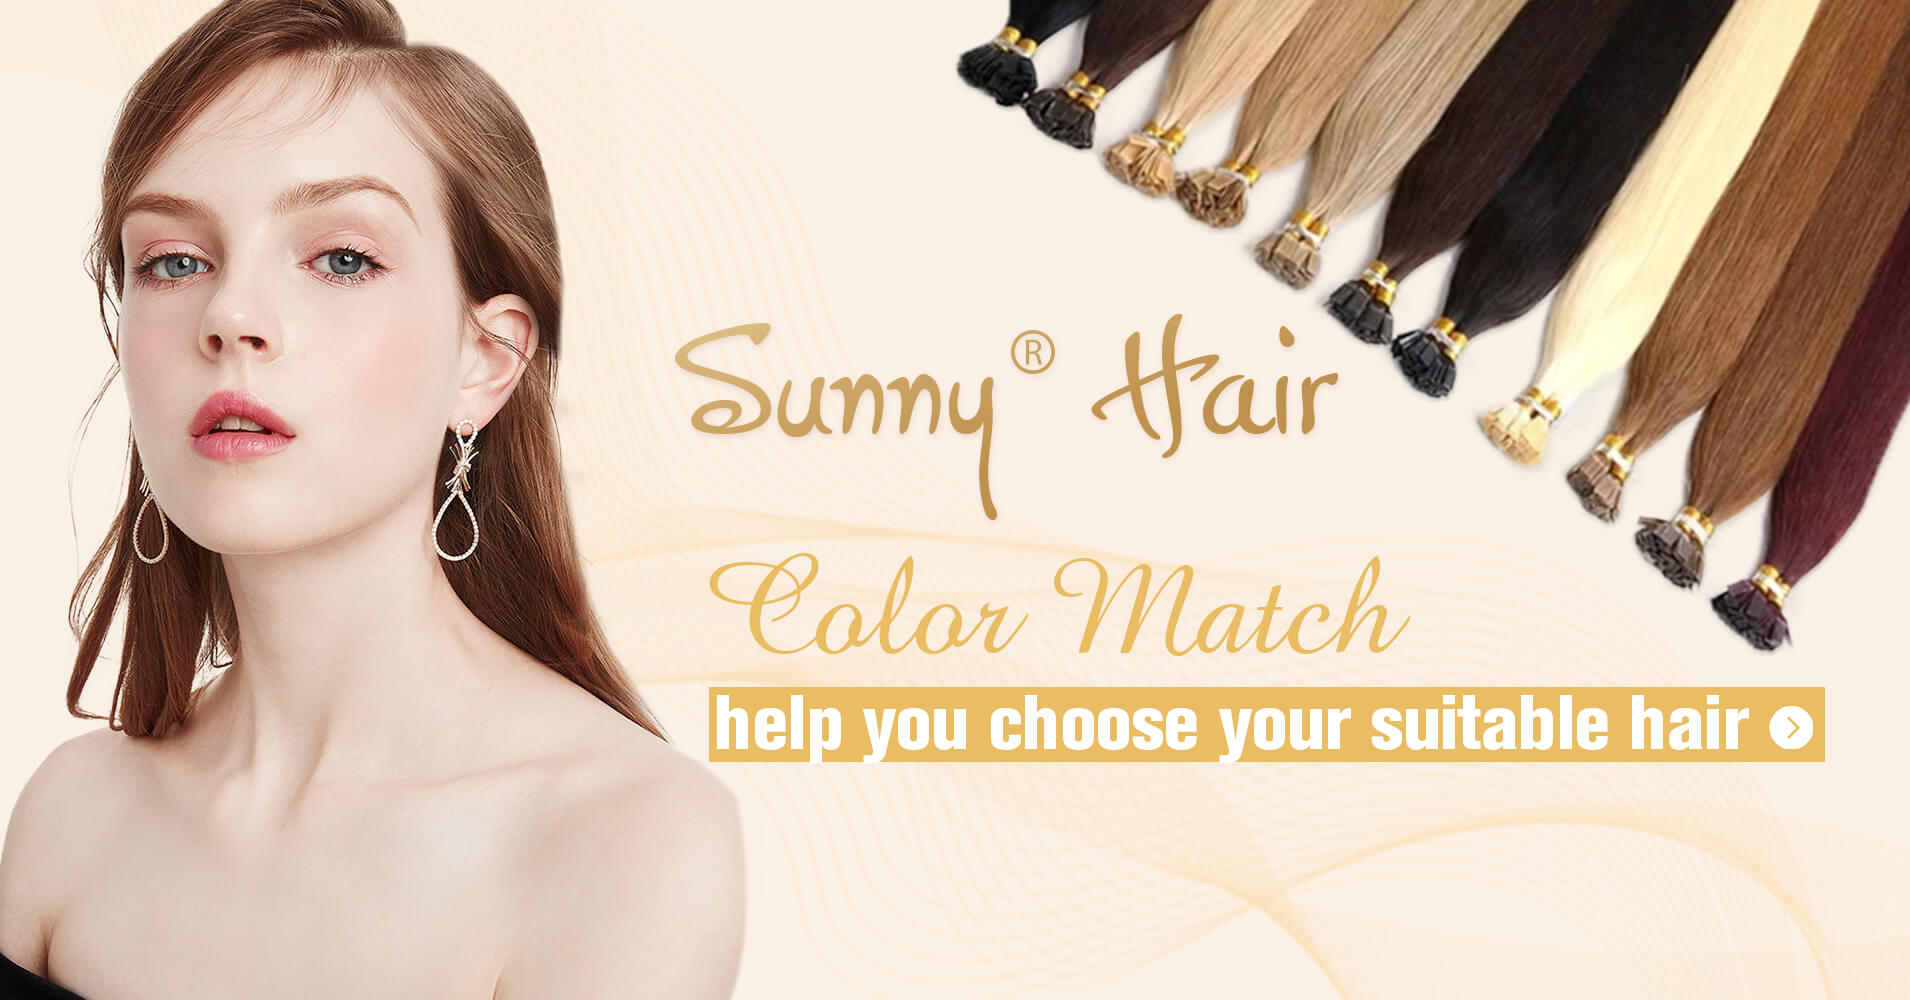 Sunny hair provide customer color match Flat silk hair weft, flat track weave extensions, flat track weft extensions, Flat weft, flat weft hair, flat weft hair extensions, free cut hair weft, minimum shedding.sew in hair,weft sew in hair extensions,hair weft extensions,wefted human hair,sew in weft hair extensions human hair,braiding hair,hair bundle,hair weft